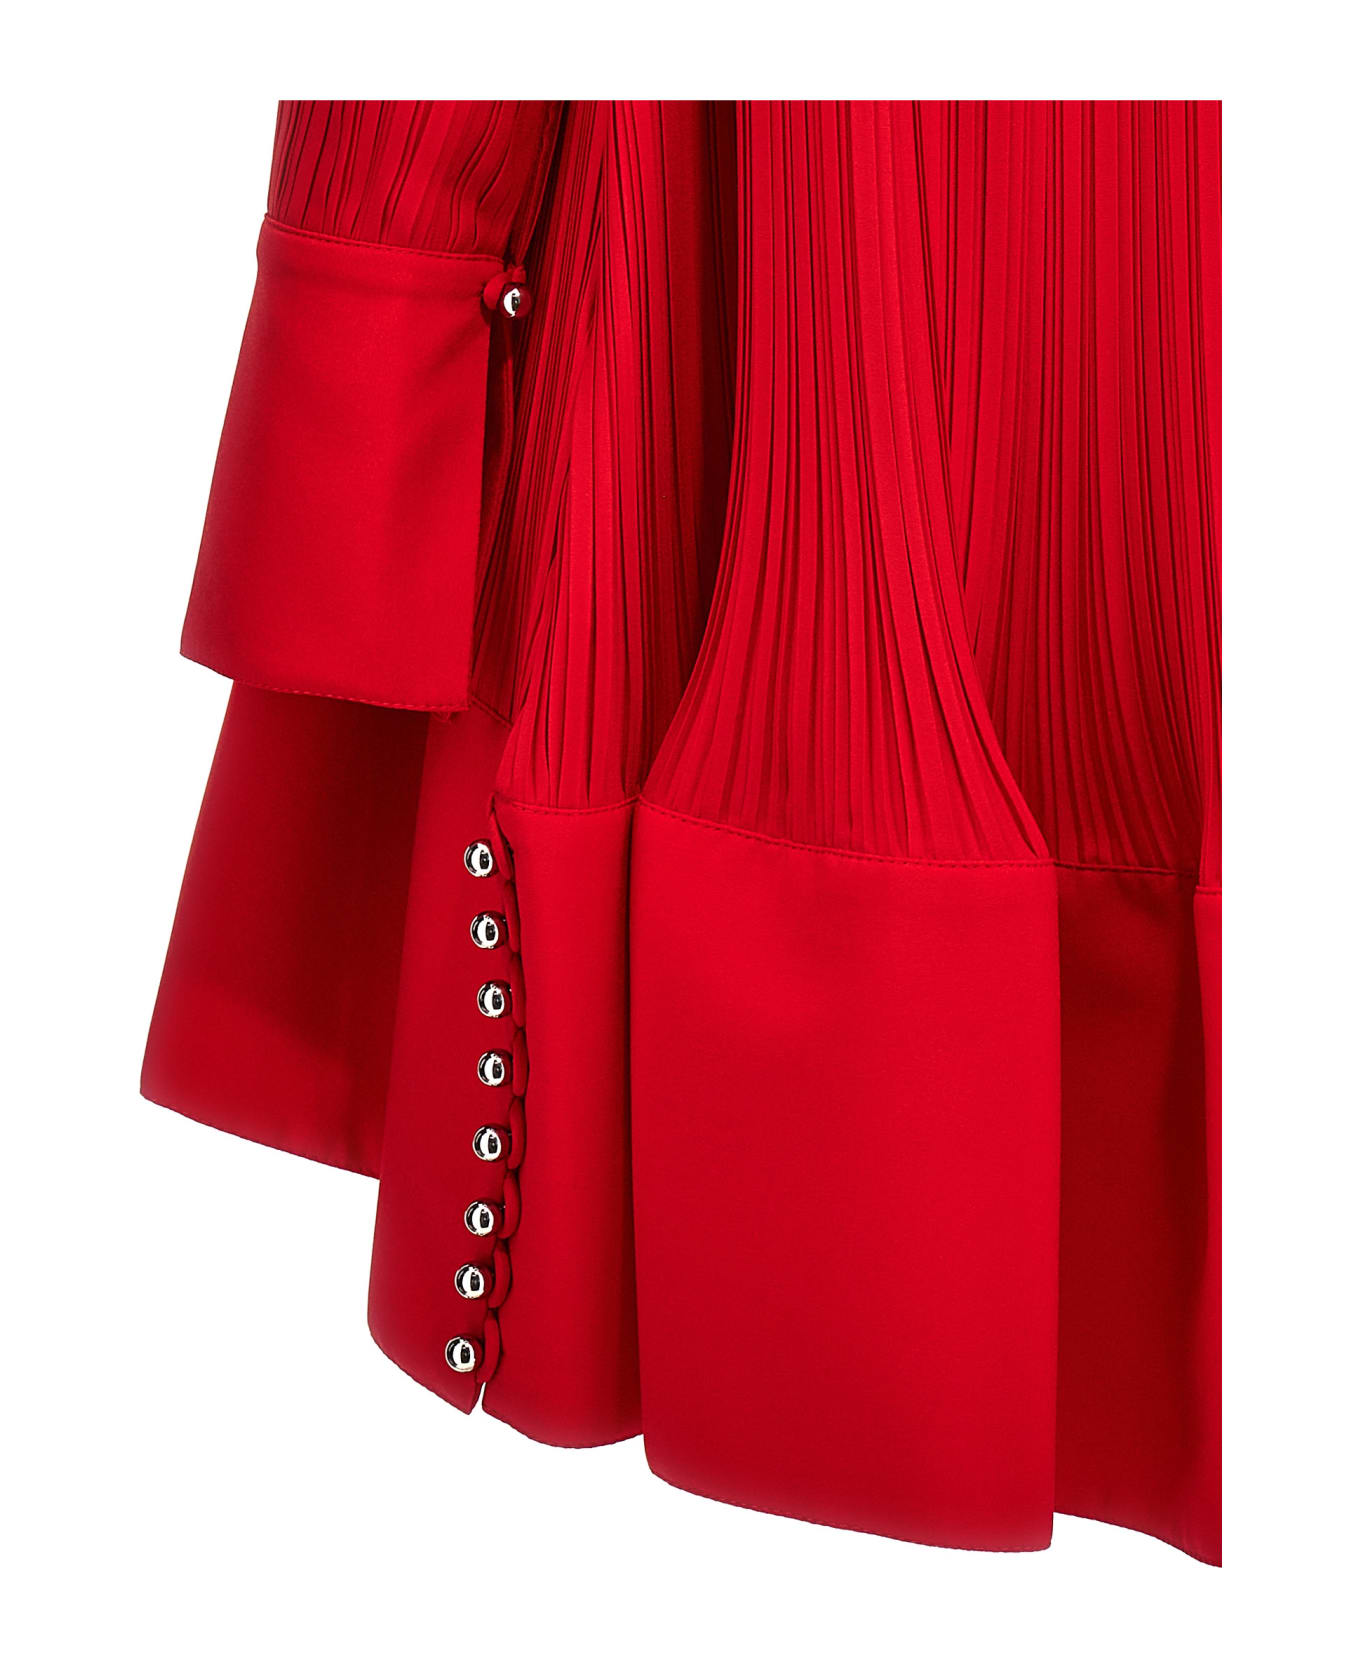 Lanvin 'flared Pleated' Dress - Red